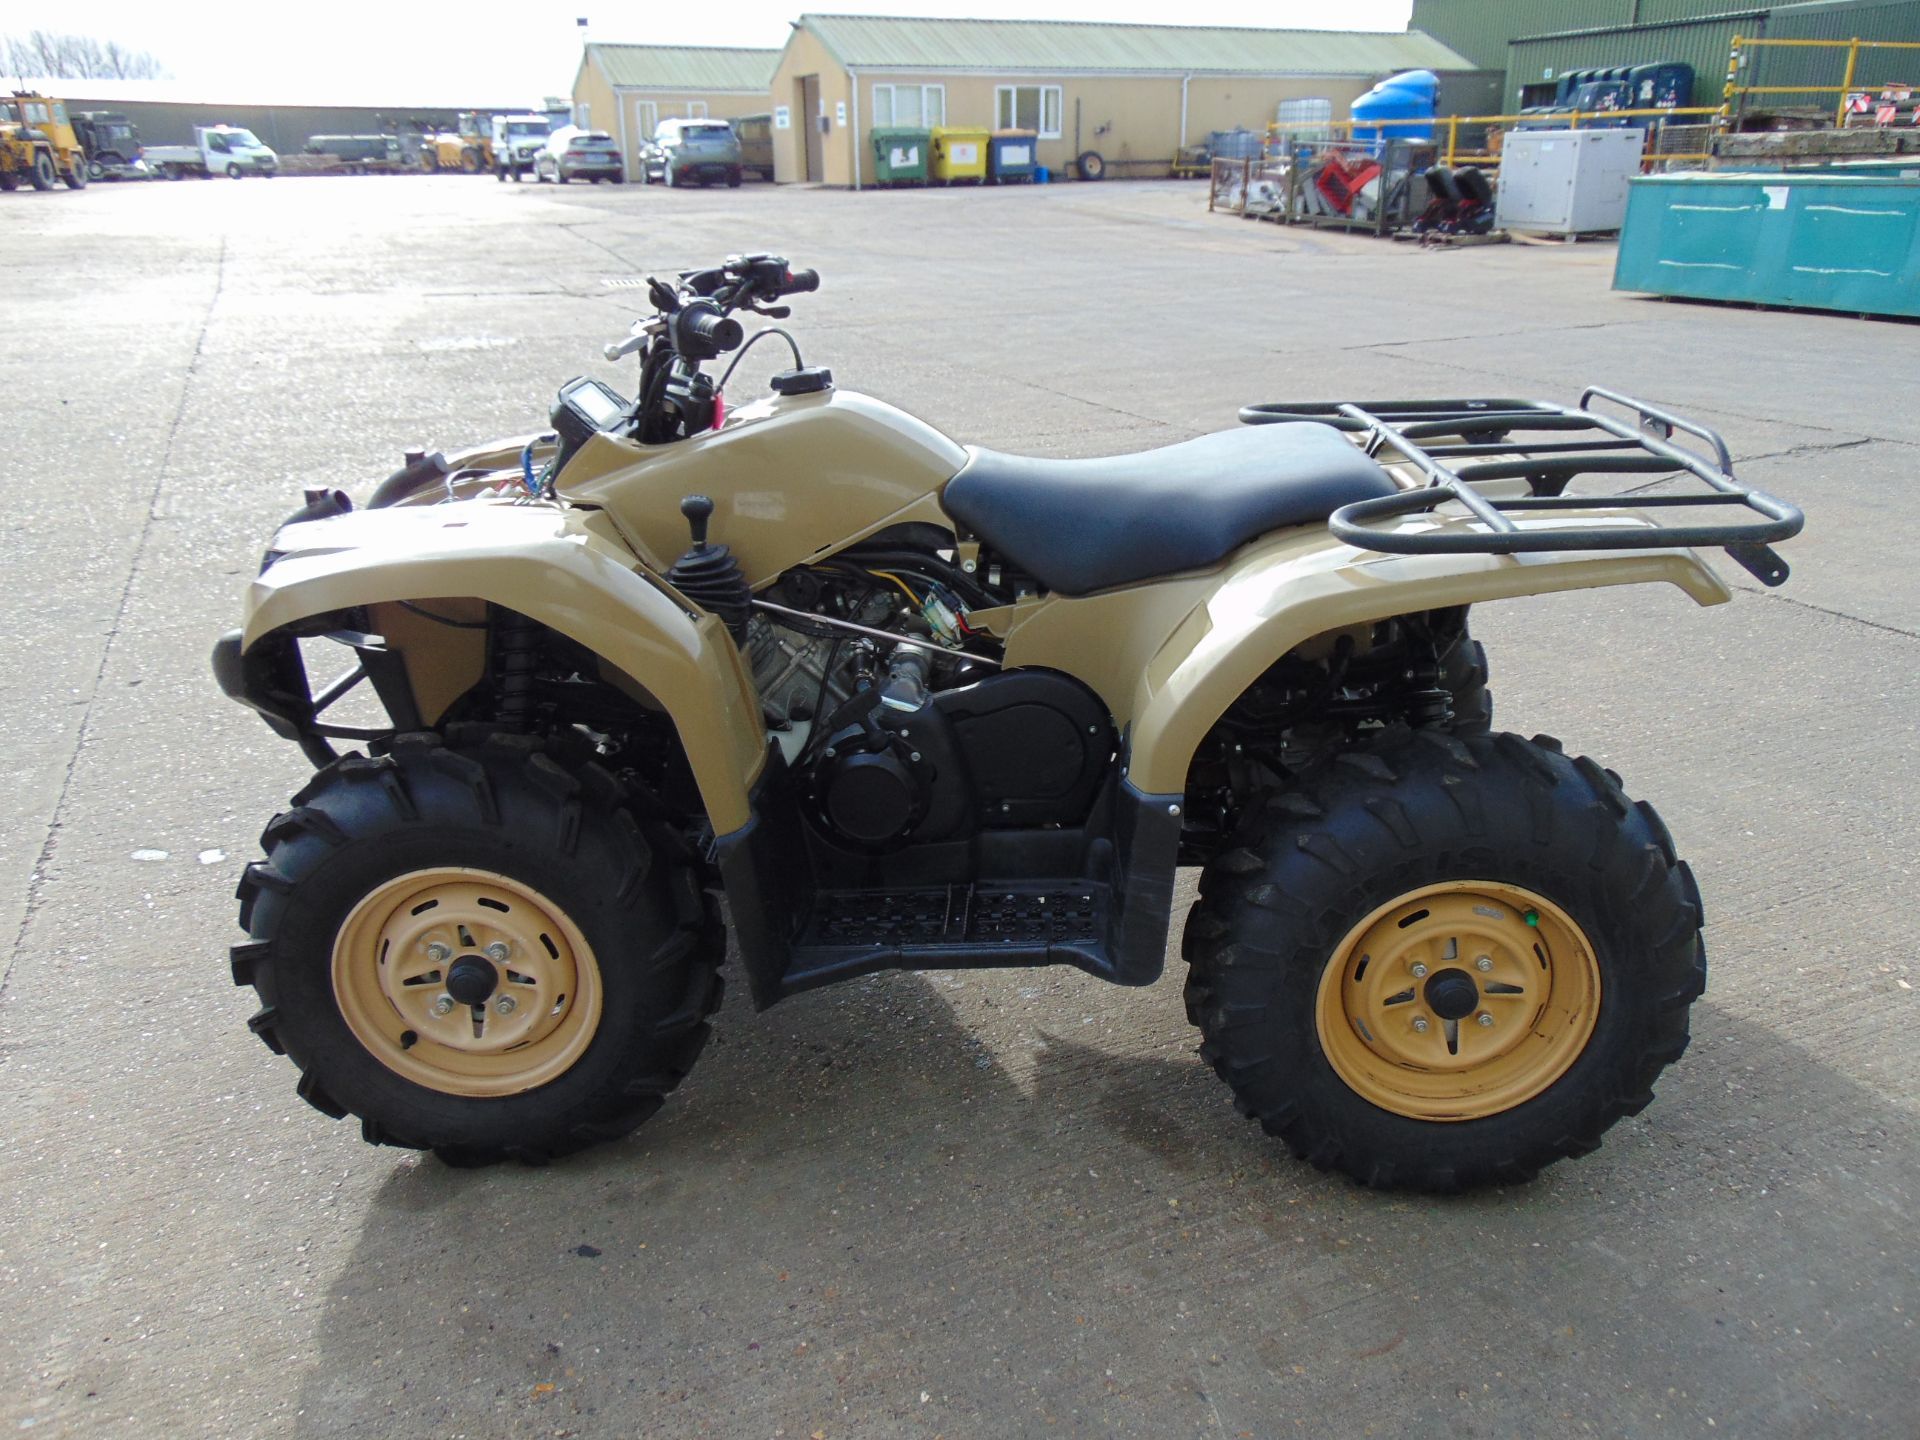 Recent Release Military Specification Yamaha Grizzly 450 4 x 4 ATV Quad Bike ONLY 75 Miles!!! - Image 5 of 24